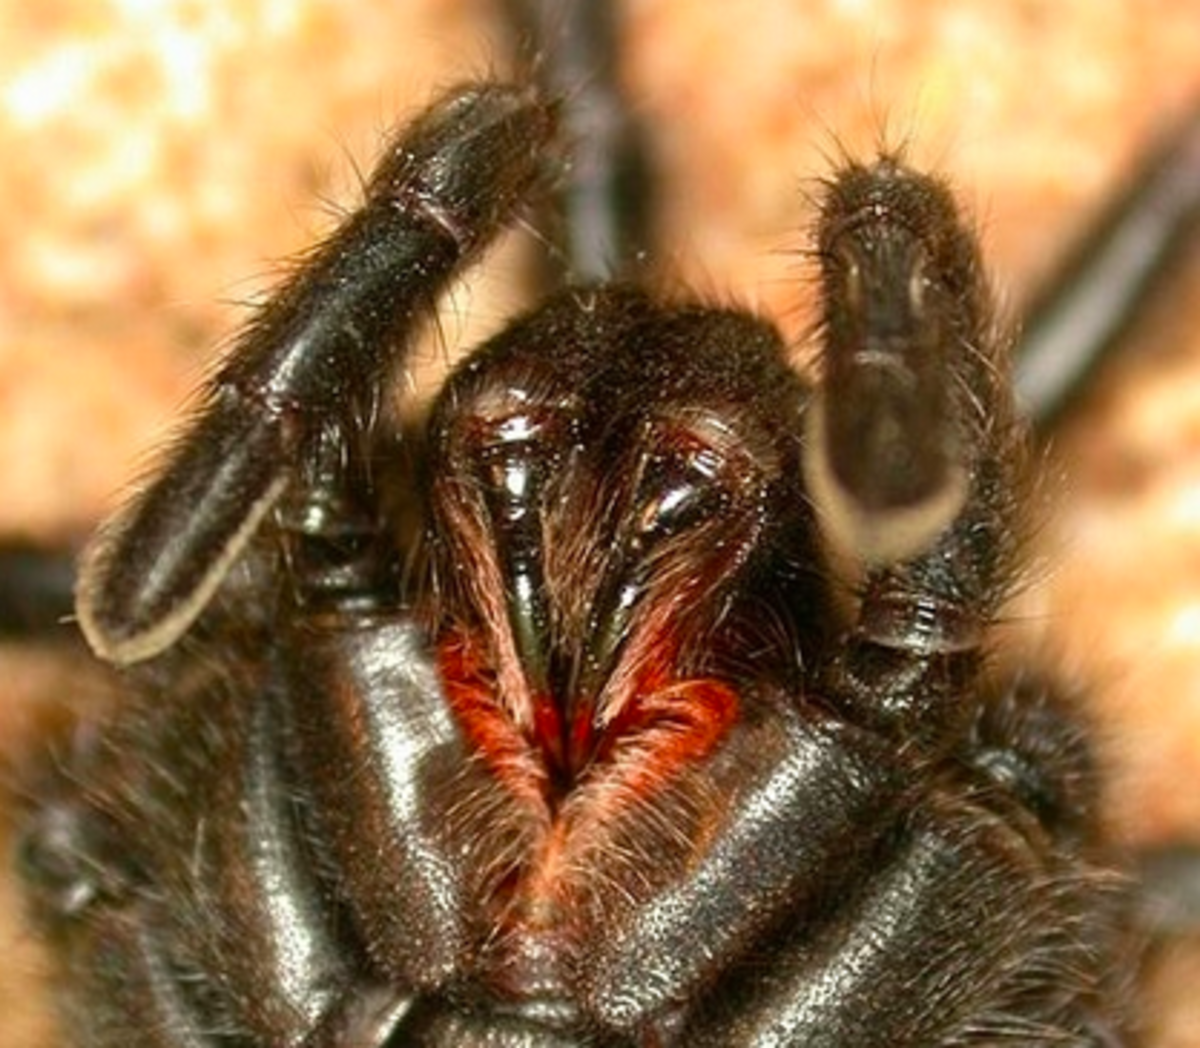 The huge fangs of the funnel-web spider.